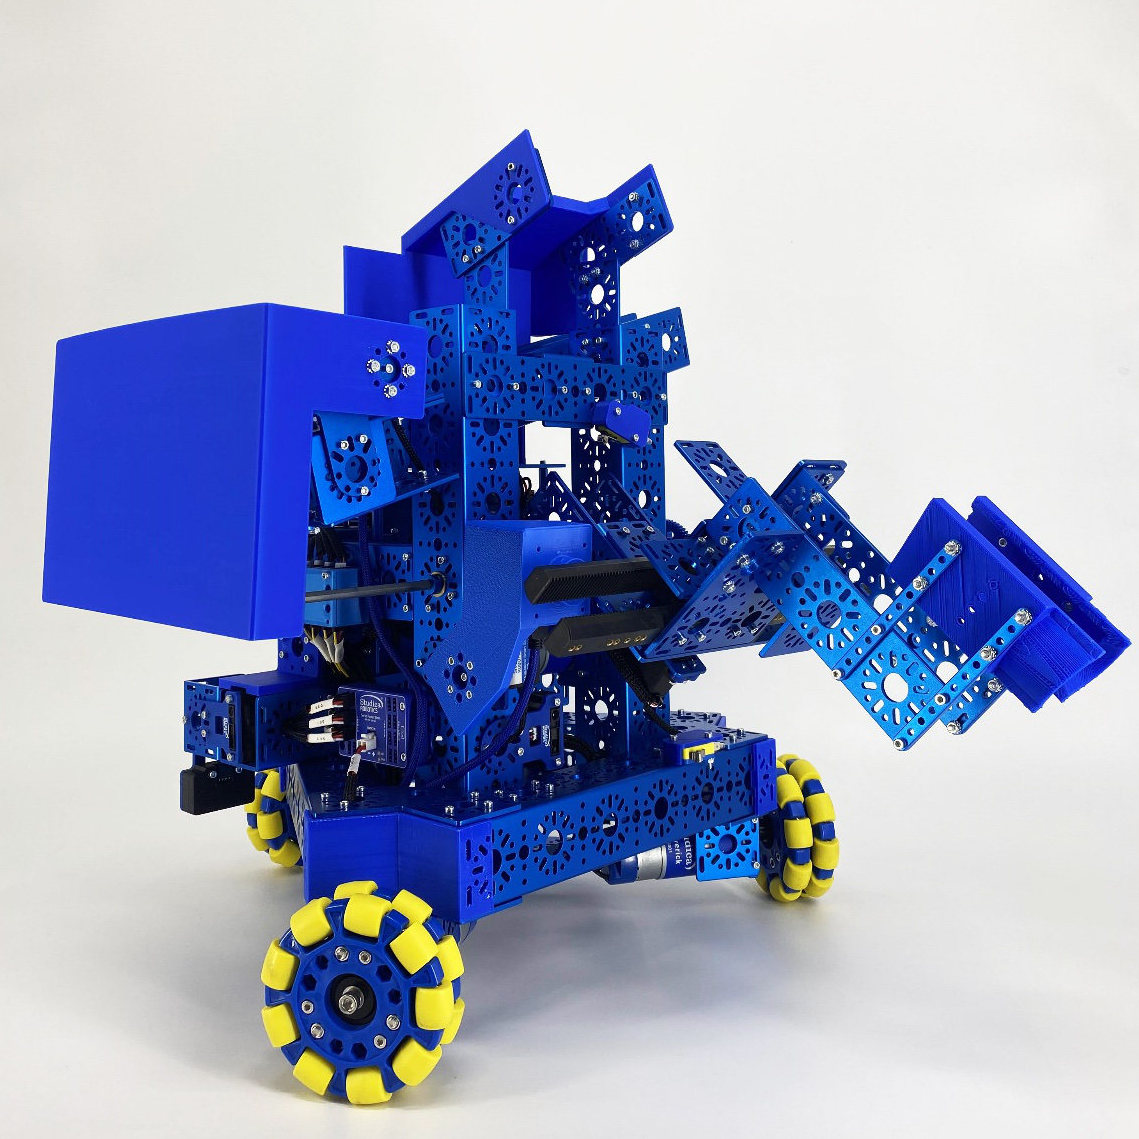 An image showing the details of a mobile robot by Studica Robotics including wheels and arm.